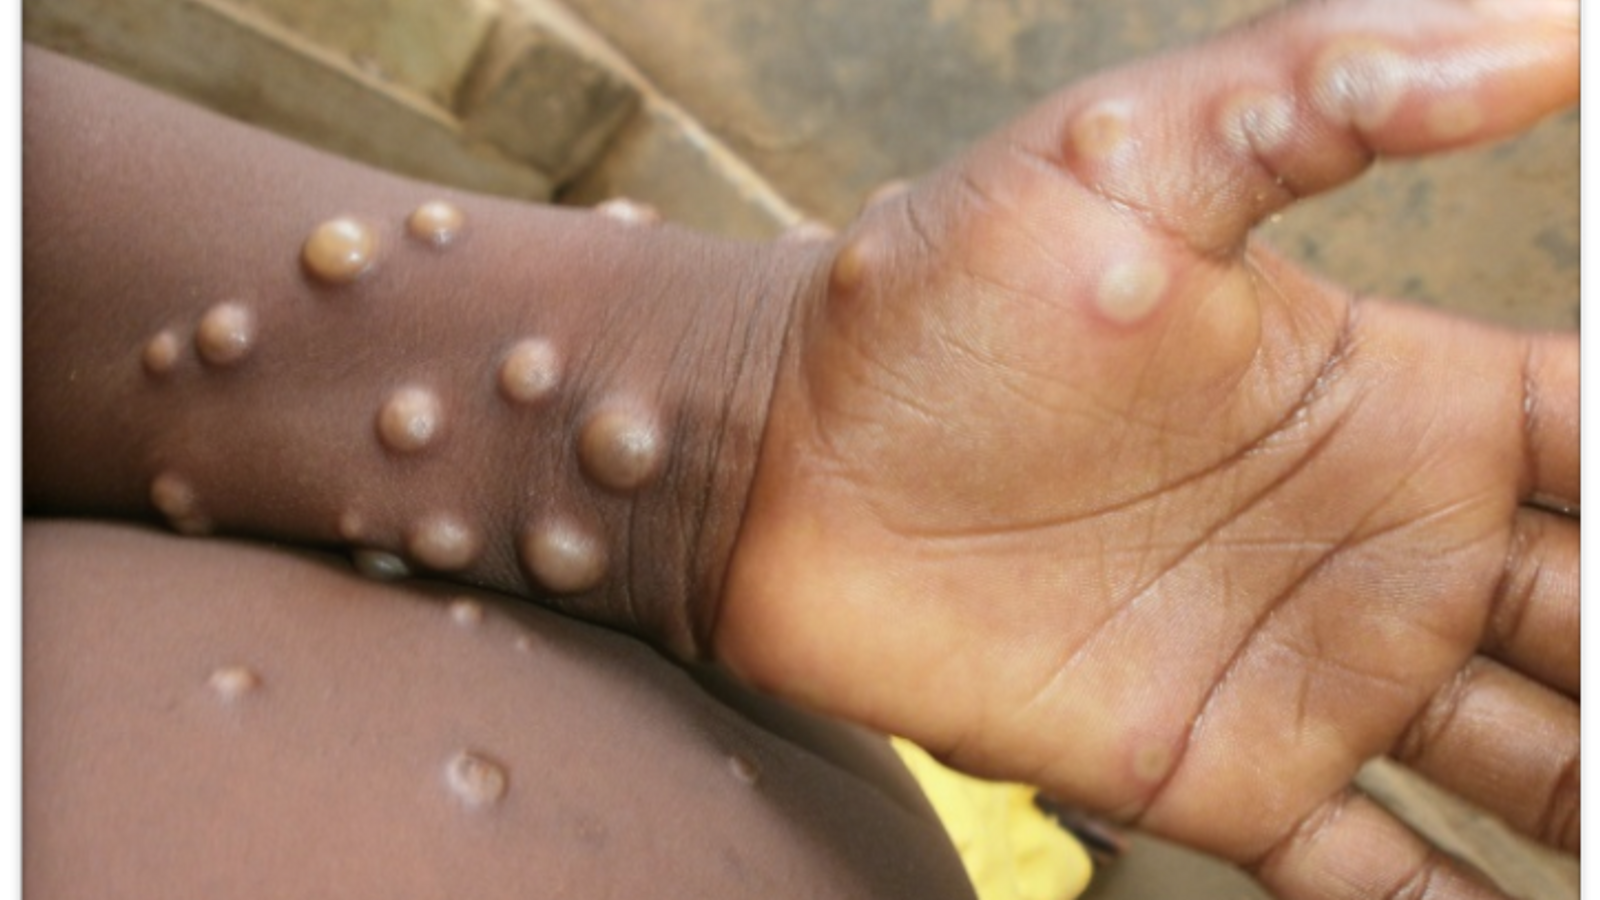 A suspected case of monkeypox examined in Greece